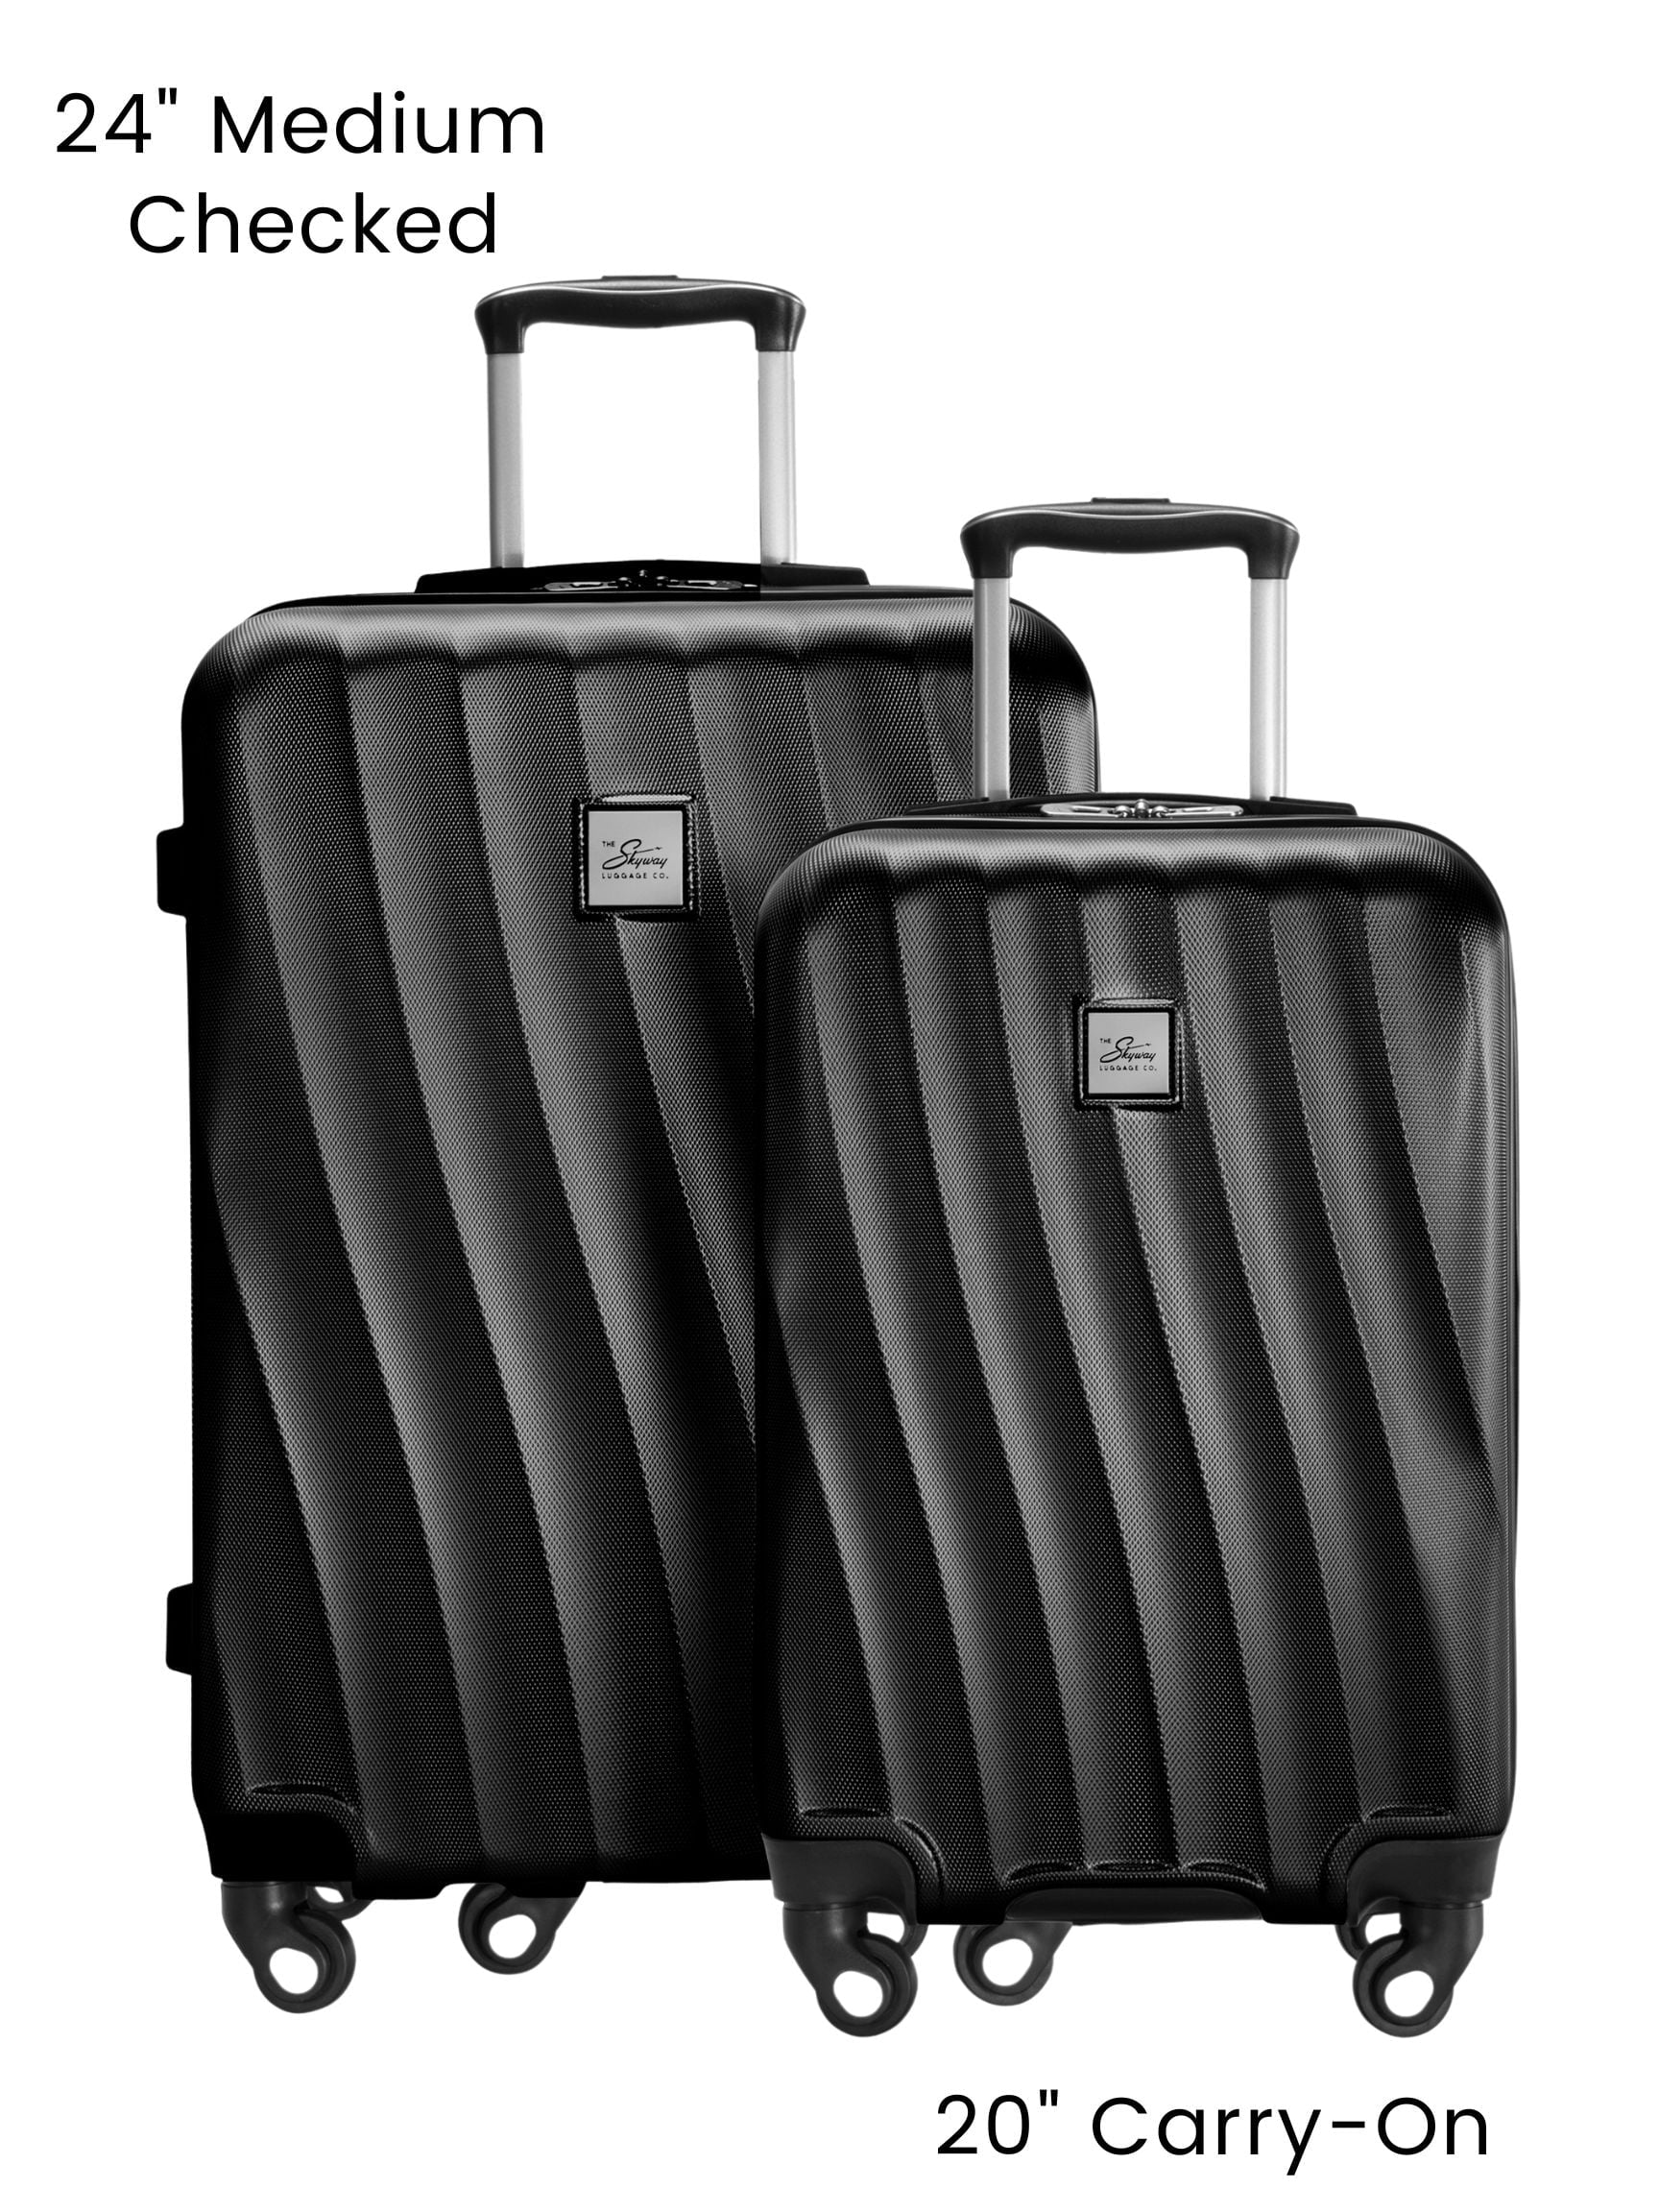 "Roche Harbor Black 2-Piece Hardside Luggage Set with Spinner Wheels"